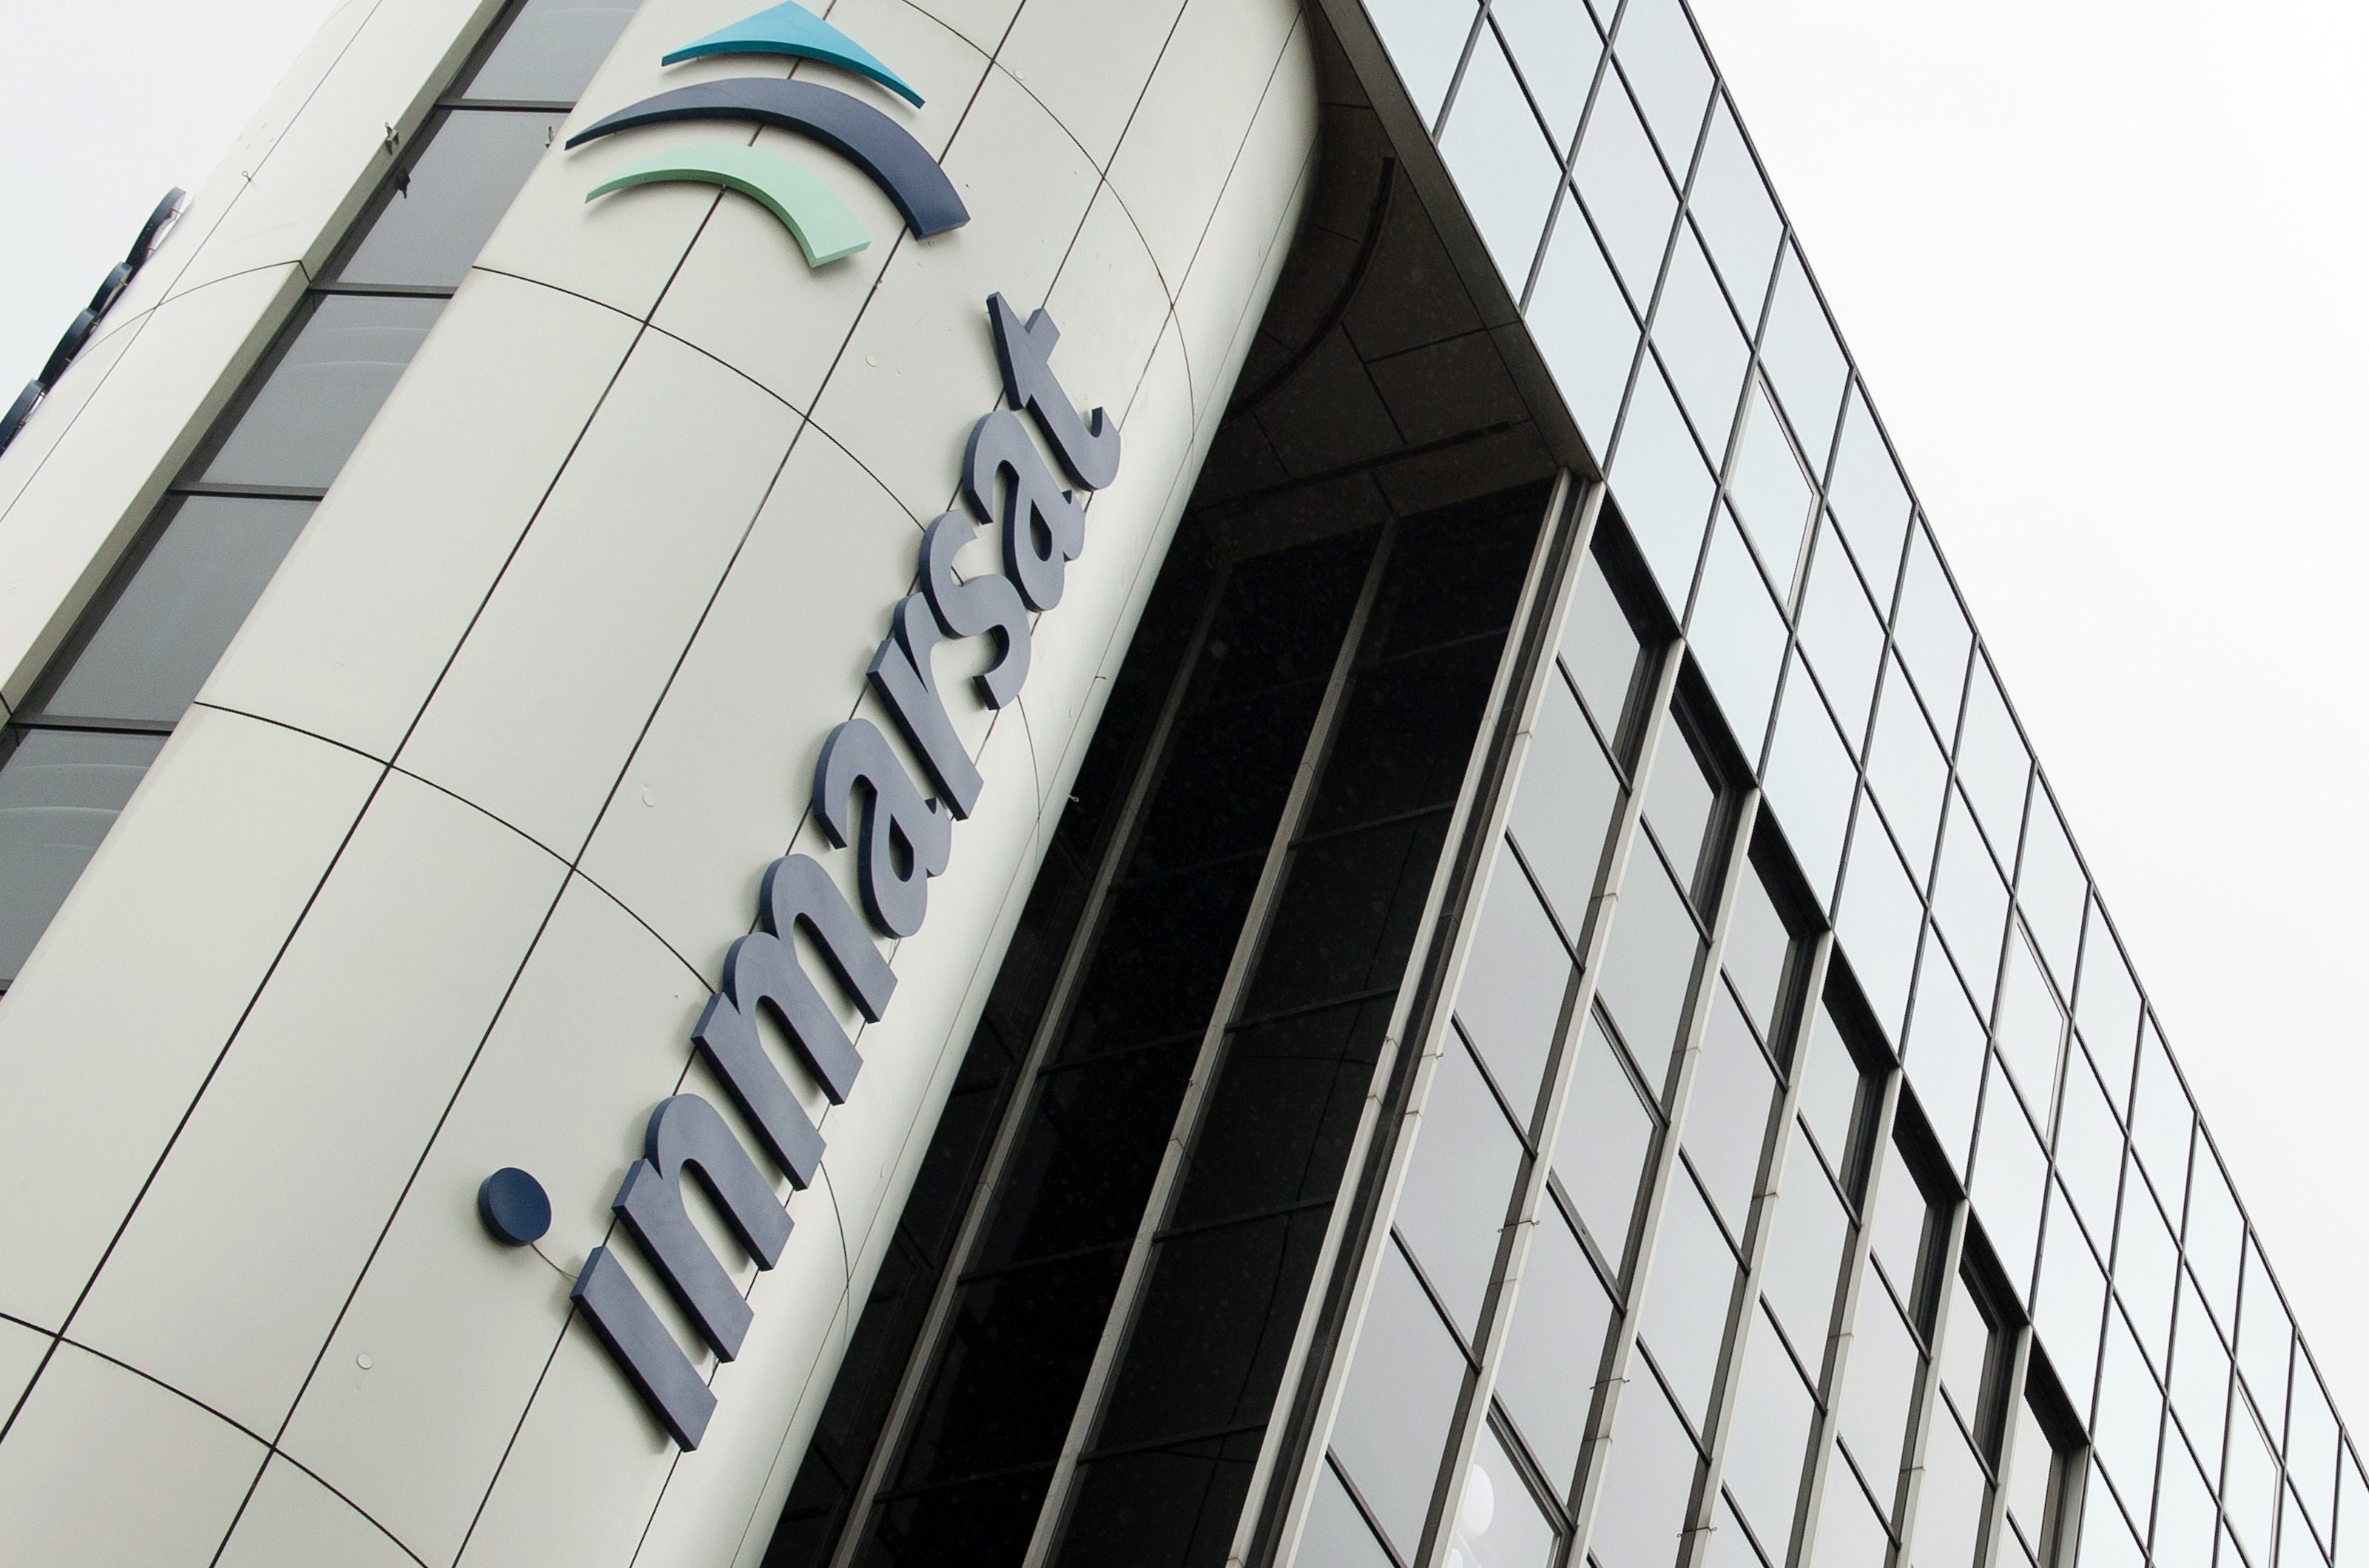 Inmarsat's £5.4bn takeover given provisional thumbs up by UK